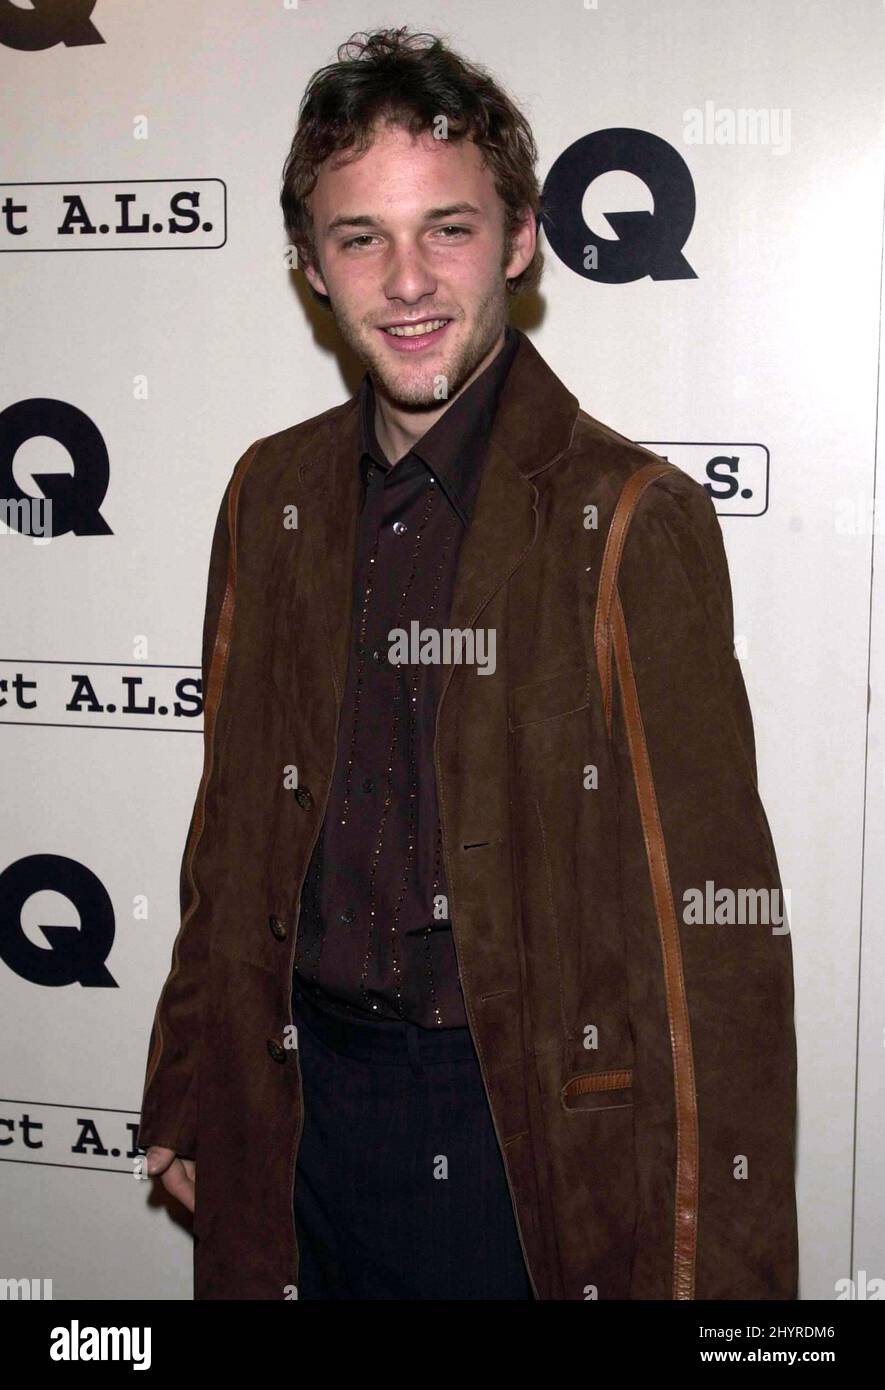 https://c8.alamy.com/comp/2HYRDM6/file-photo-dated-15022001-of-brad-renfro-as-he-attends-gq-magazines-2nd-annual-hollywood-issue-bash-held-at-the-factory-in-hollywood-ca-the-young-actor-best-known-for-his-role-in-the-legal-thriller-the-client-has-died-he-was-25-renfro-was-found-dead-in-los-angeles-on-monday-2HYRDM6.jpg